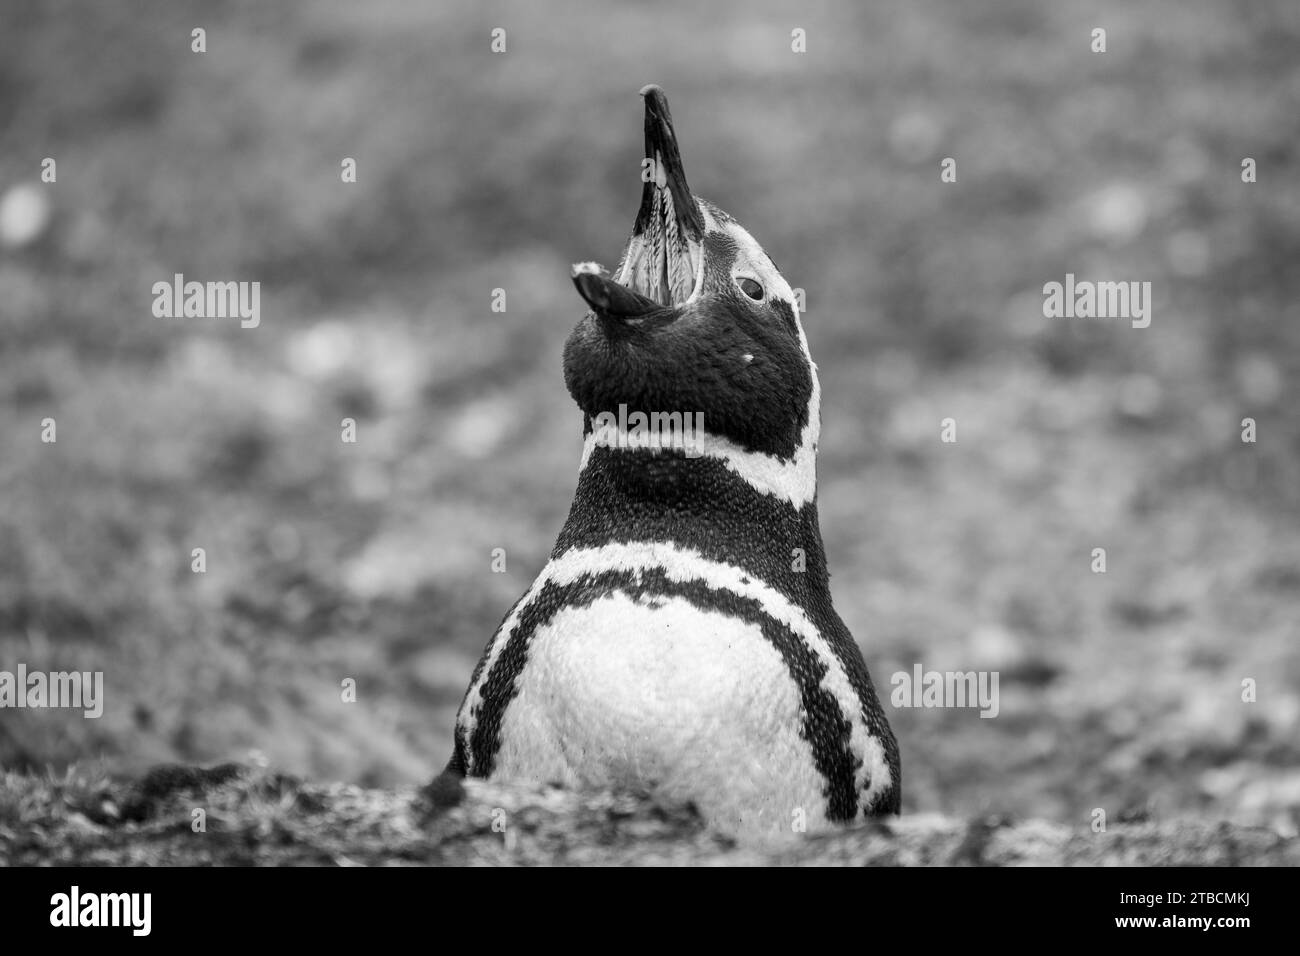 Falkland Islands, West Falklands, Saunders Island. Magellanic penguin (Spheniscus magellanicus) with open mouth showing papillae spikes. Stock Photo